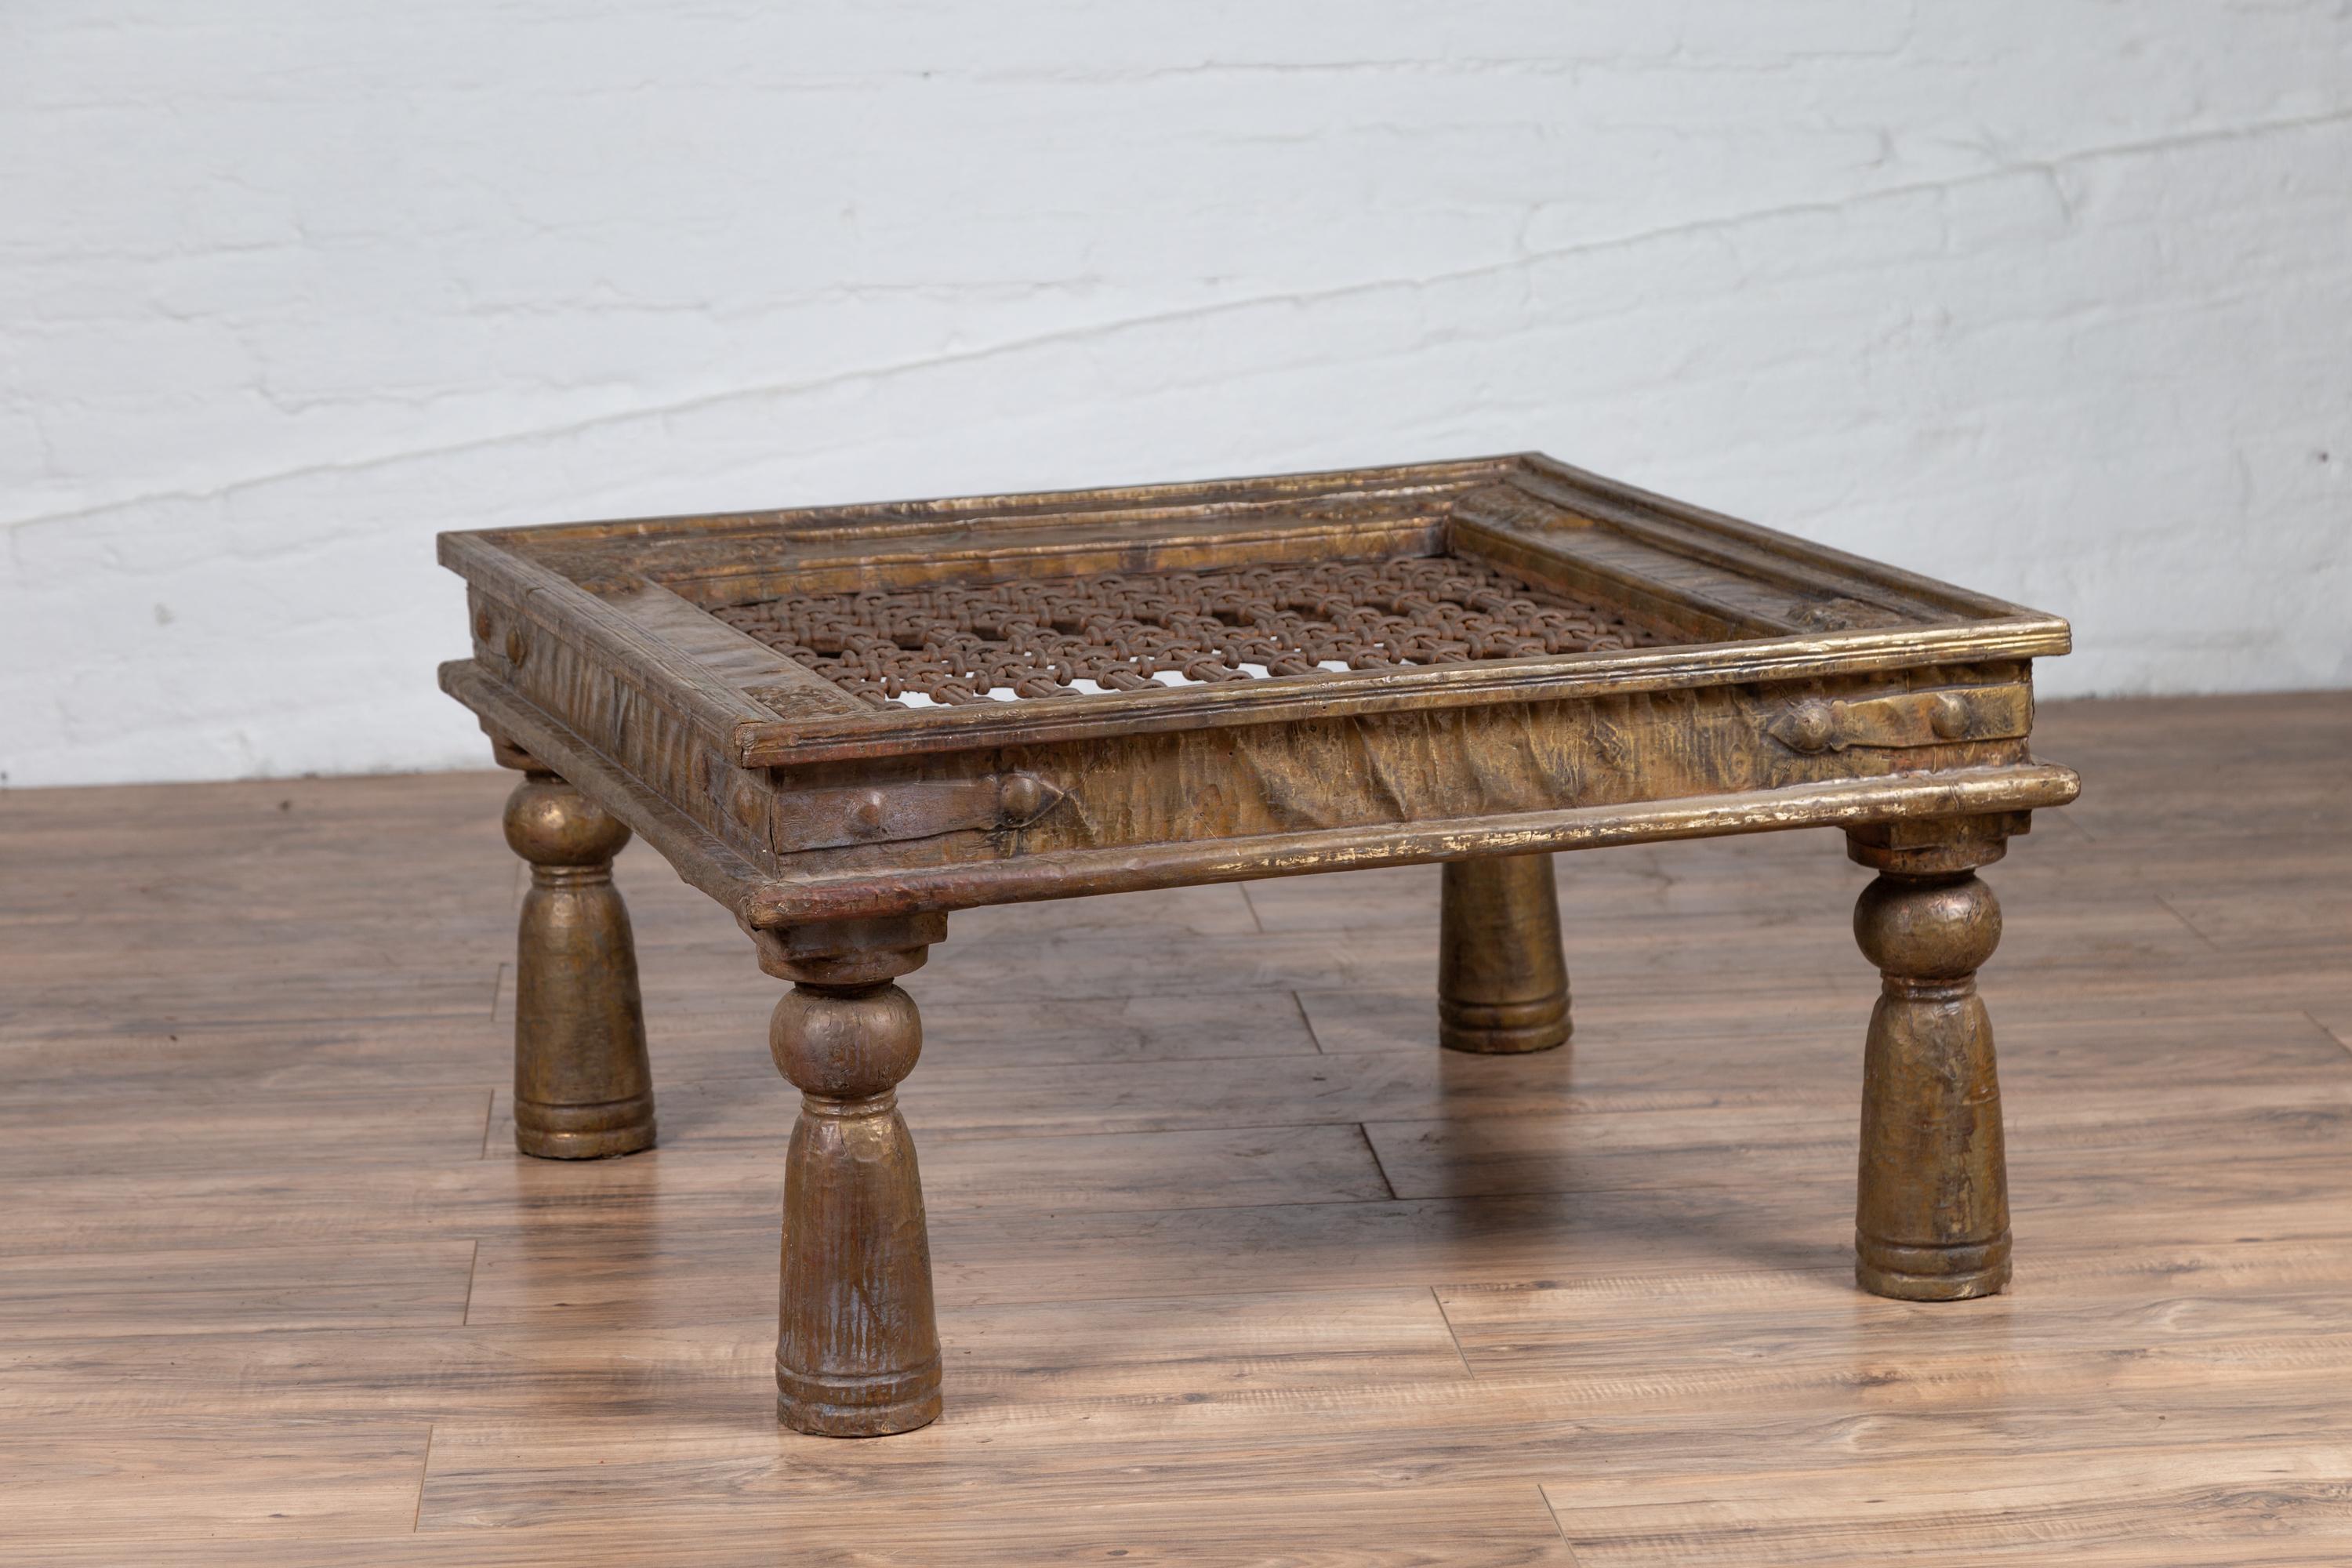 Antique Indian Brass Window Grate Coffee Table with Iron Geometric Design For Sale 3